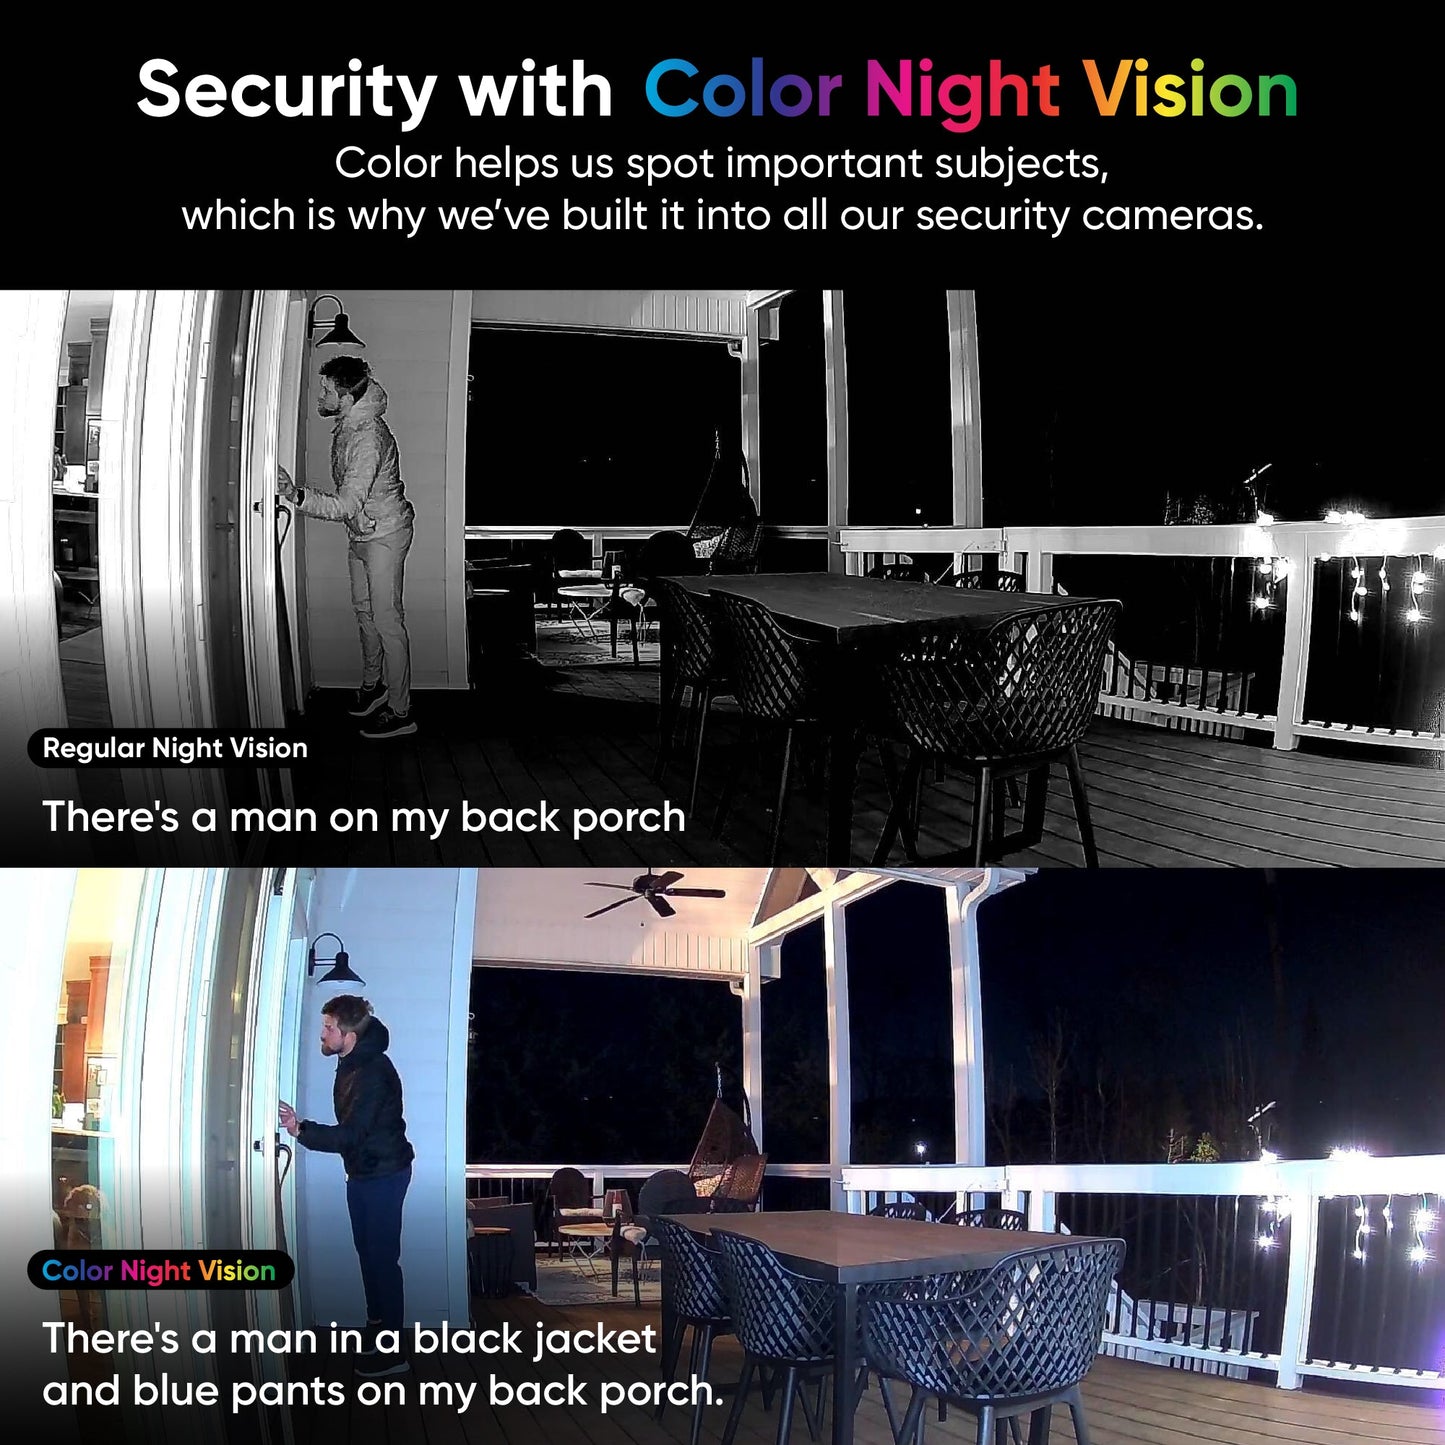 Split image comparison of regular black and white night vision and color night vision. Text overlay that says "Security with Color Night Vision."